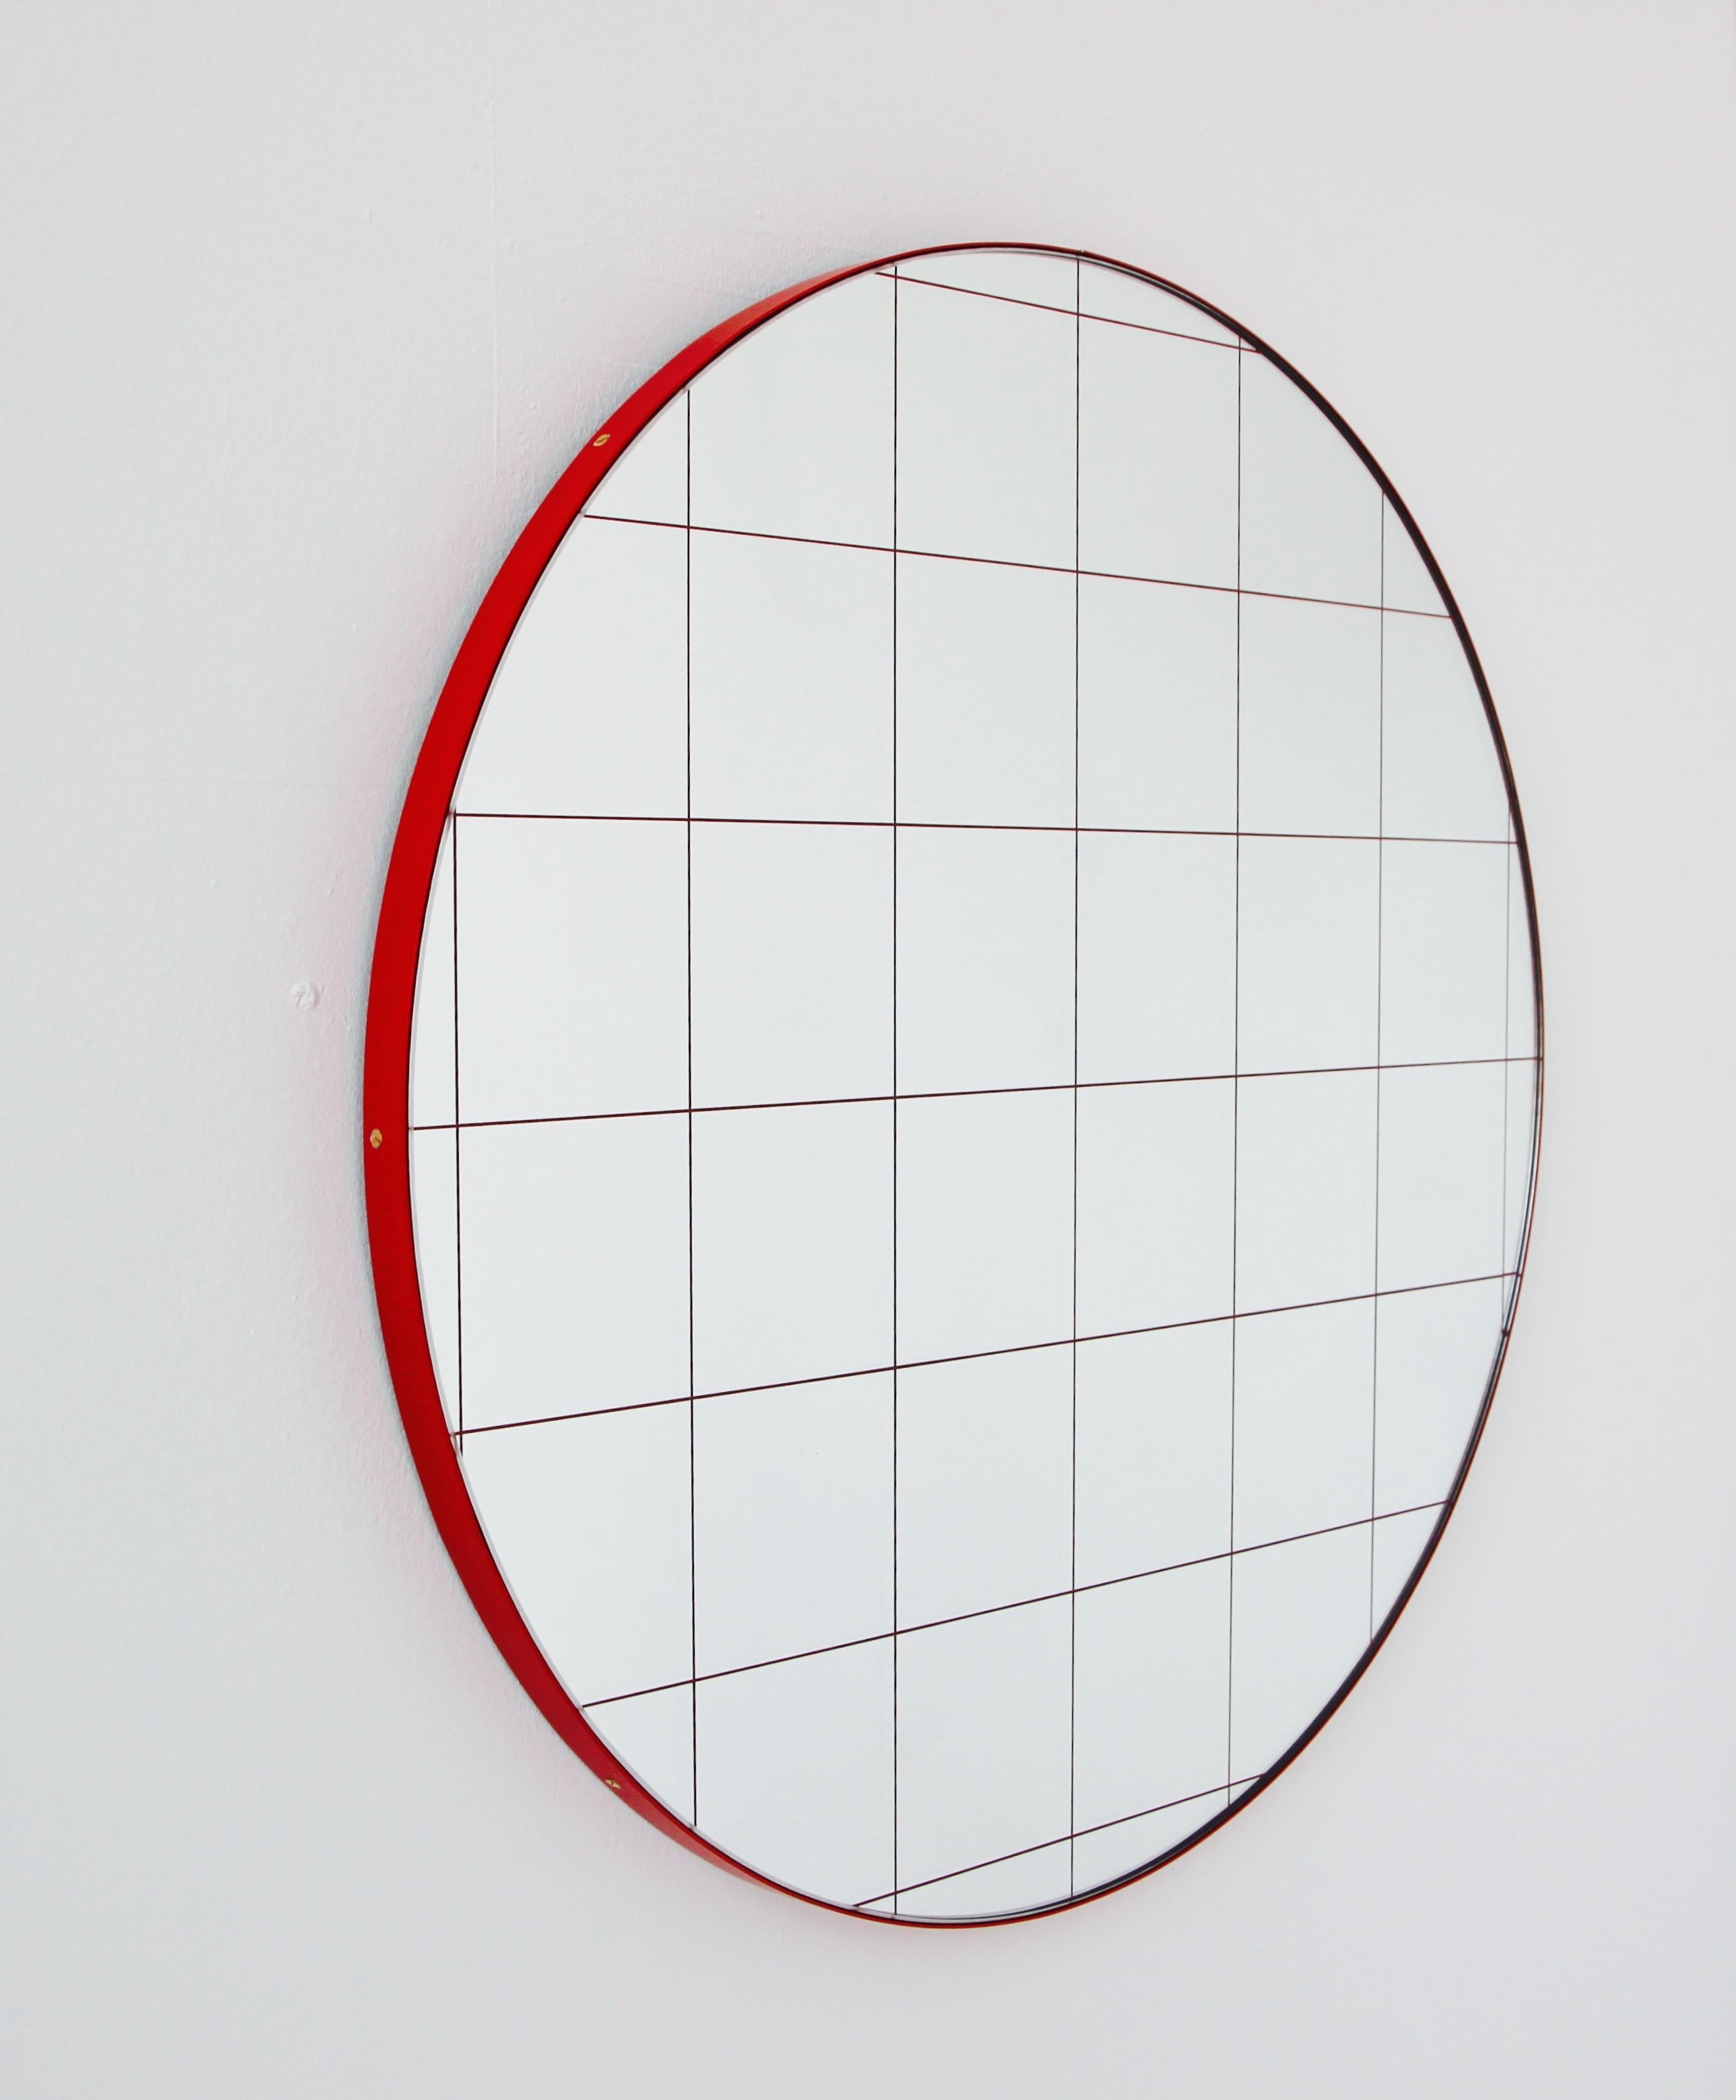 Organic Modern Orbis Red Grid Round Contemporary Mirror with Red Frame, Large